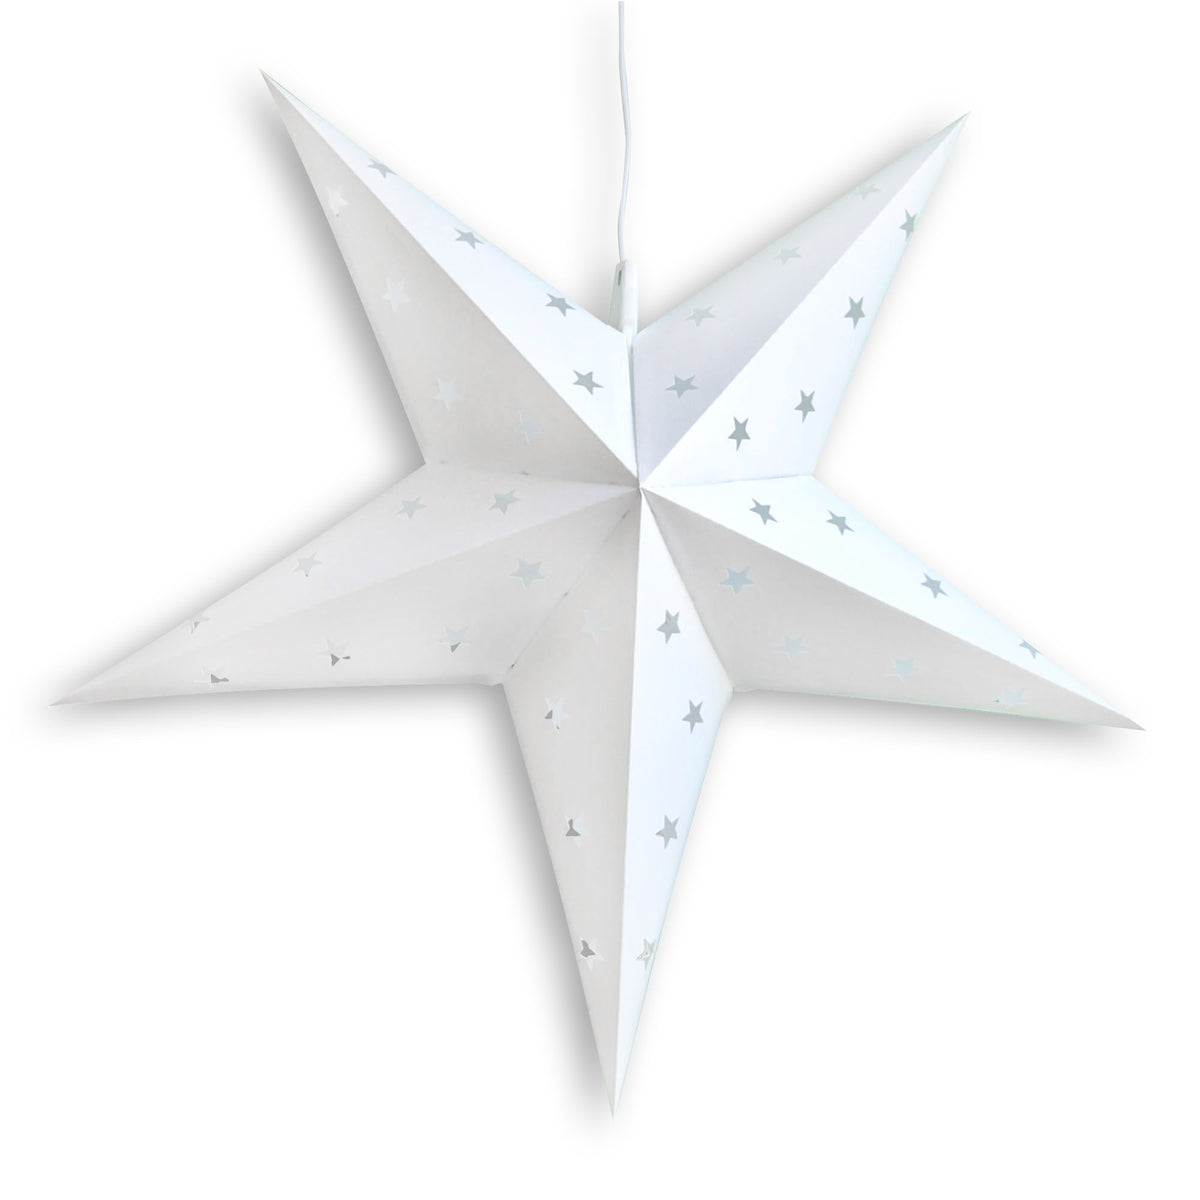 22&quot; White Weatherproof Star Lantern Lamp, Hanging Decoration (Shade Only)